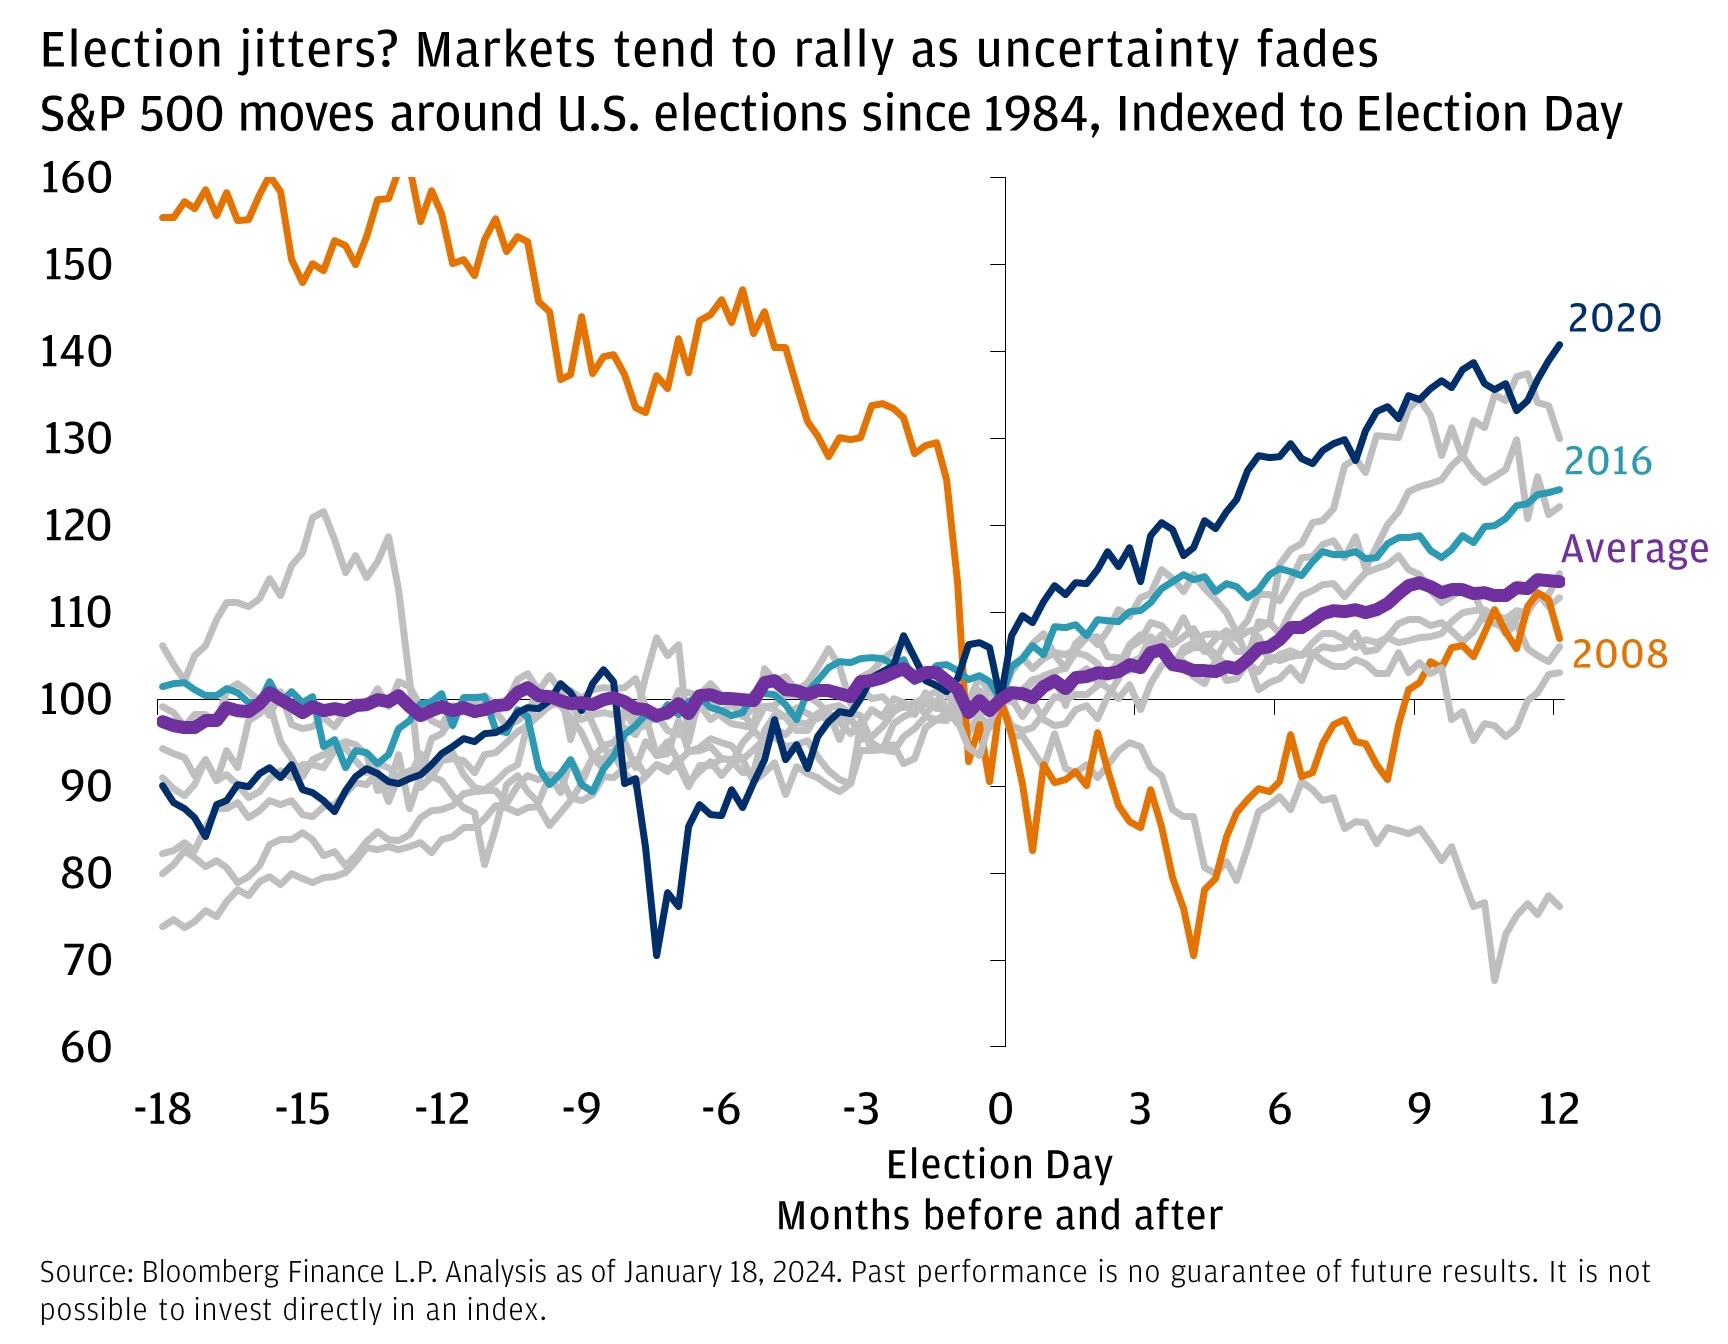 This chart shows the S&P 500 performance around U.S. elections since 1980, Indexed to Election Day.